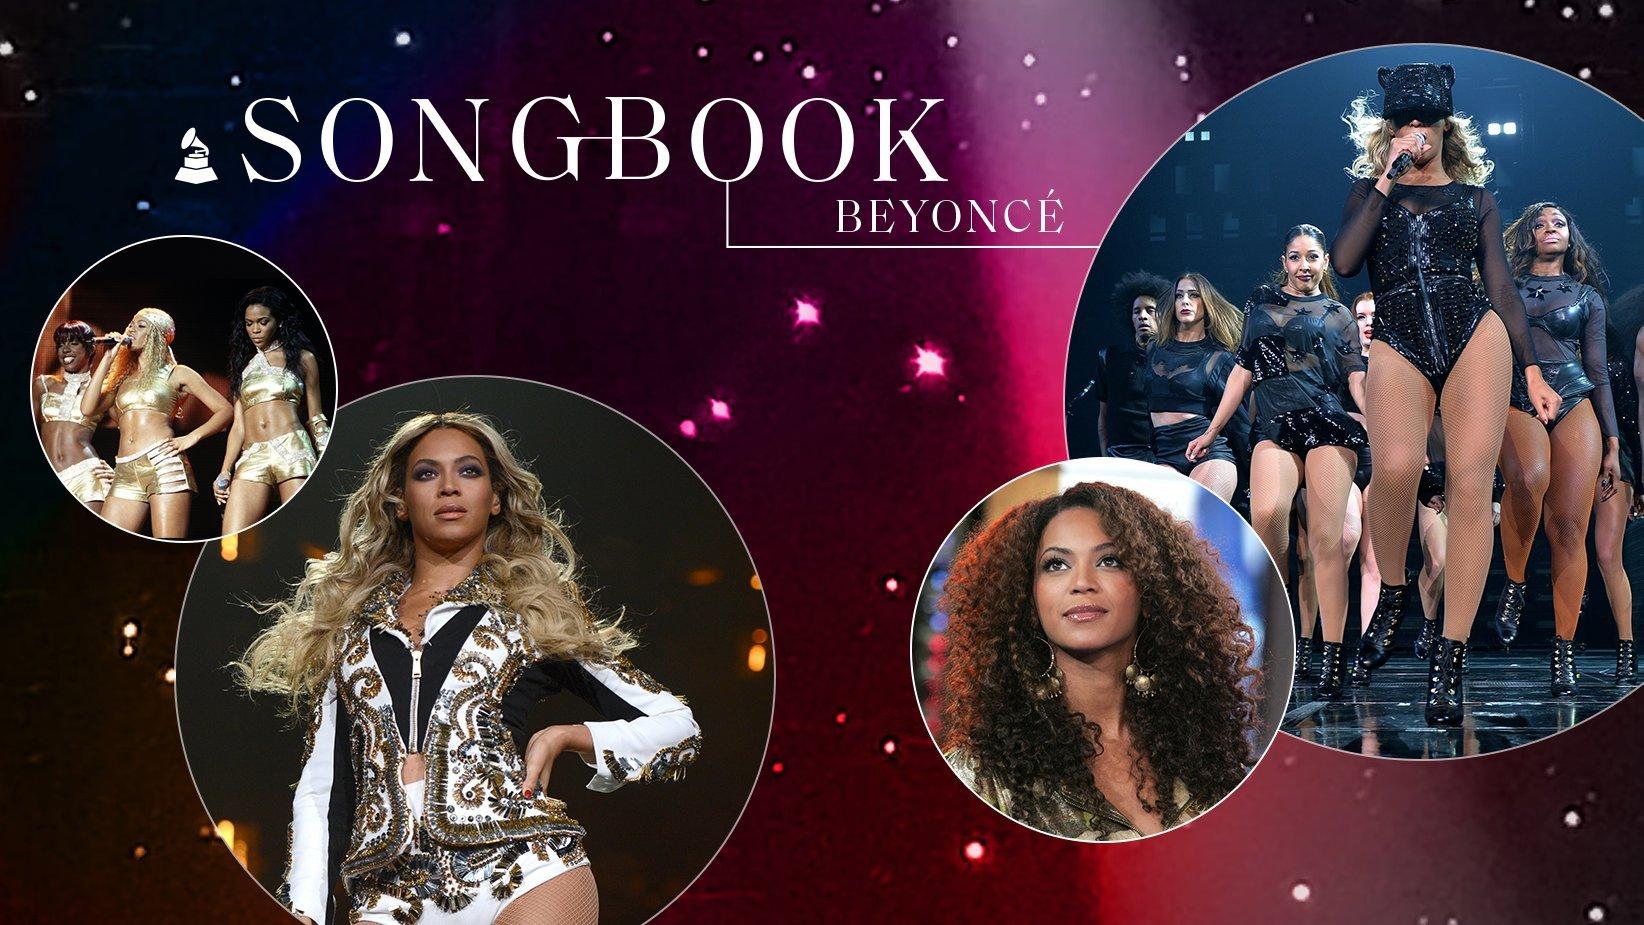 Photos of Beyoncé throughout the years